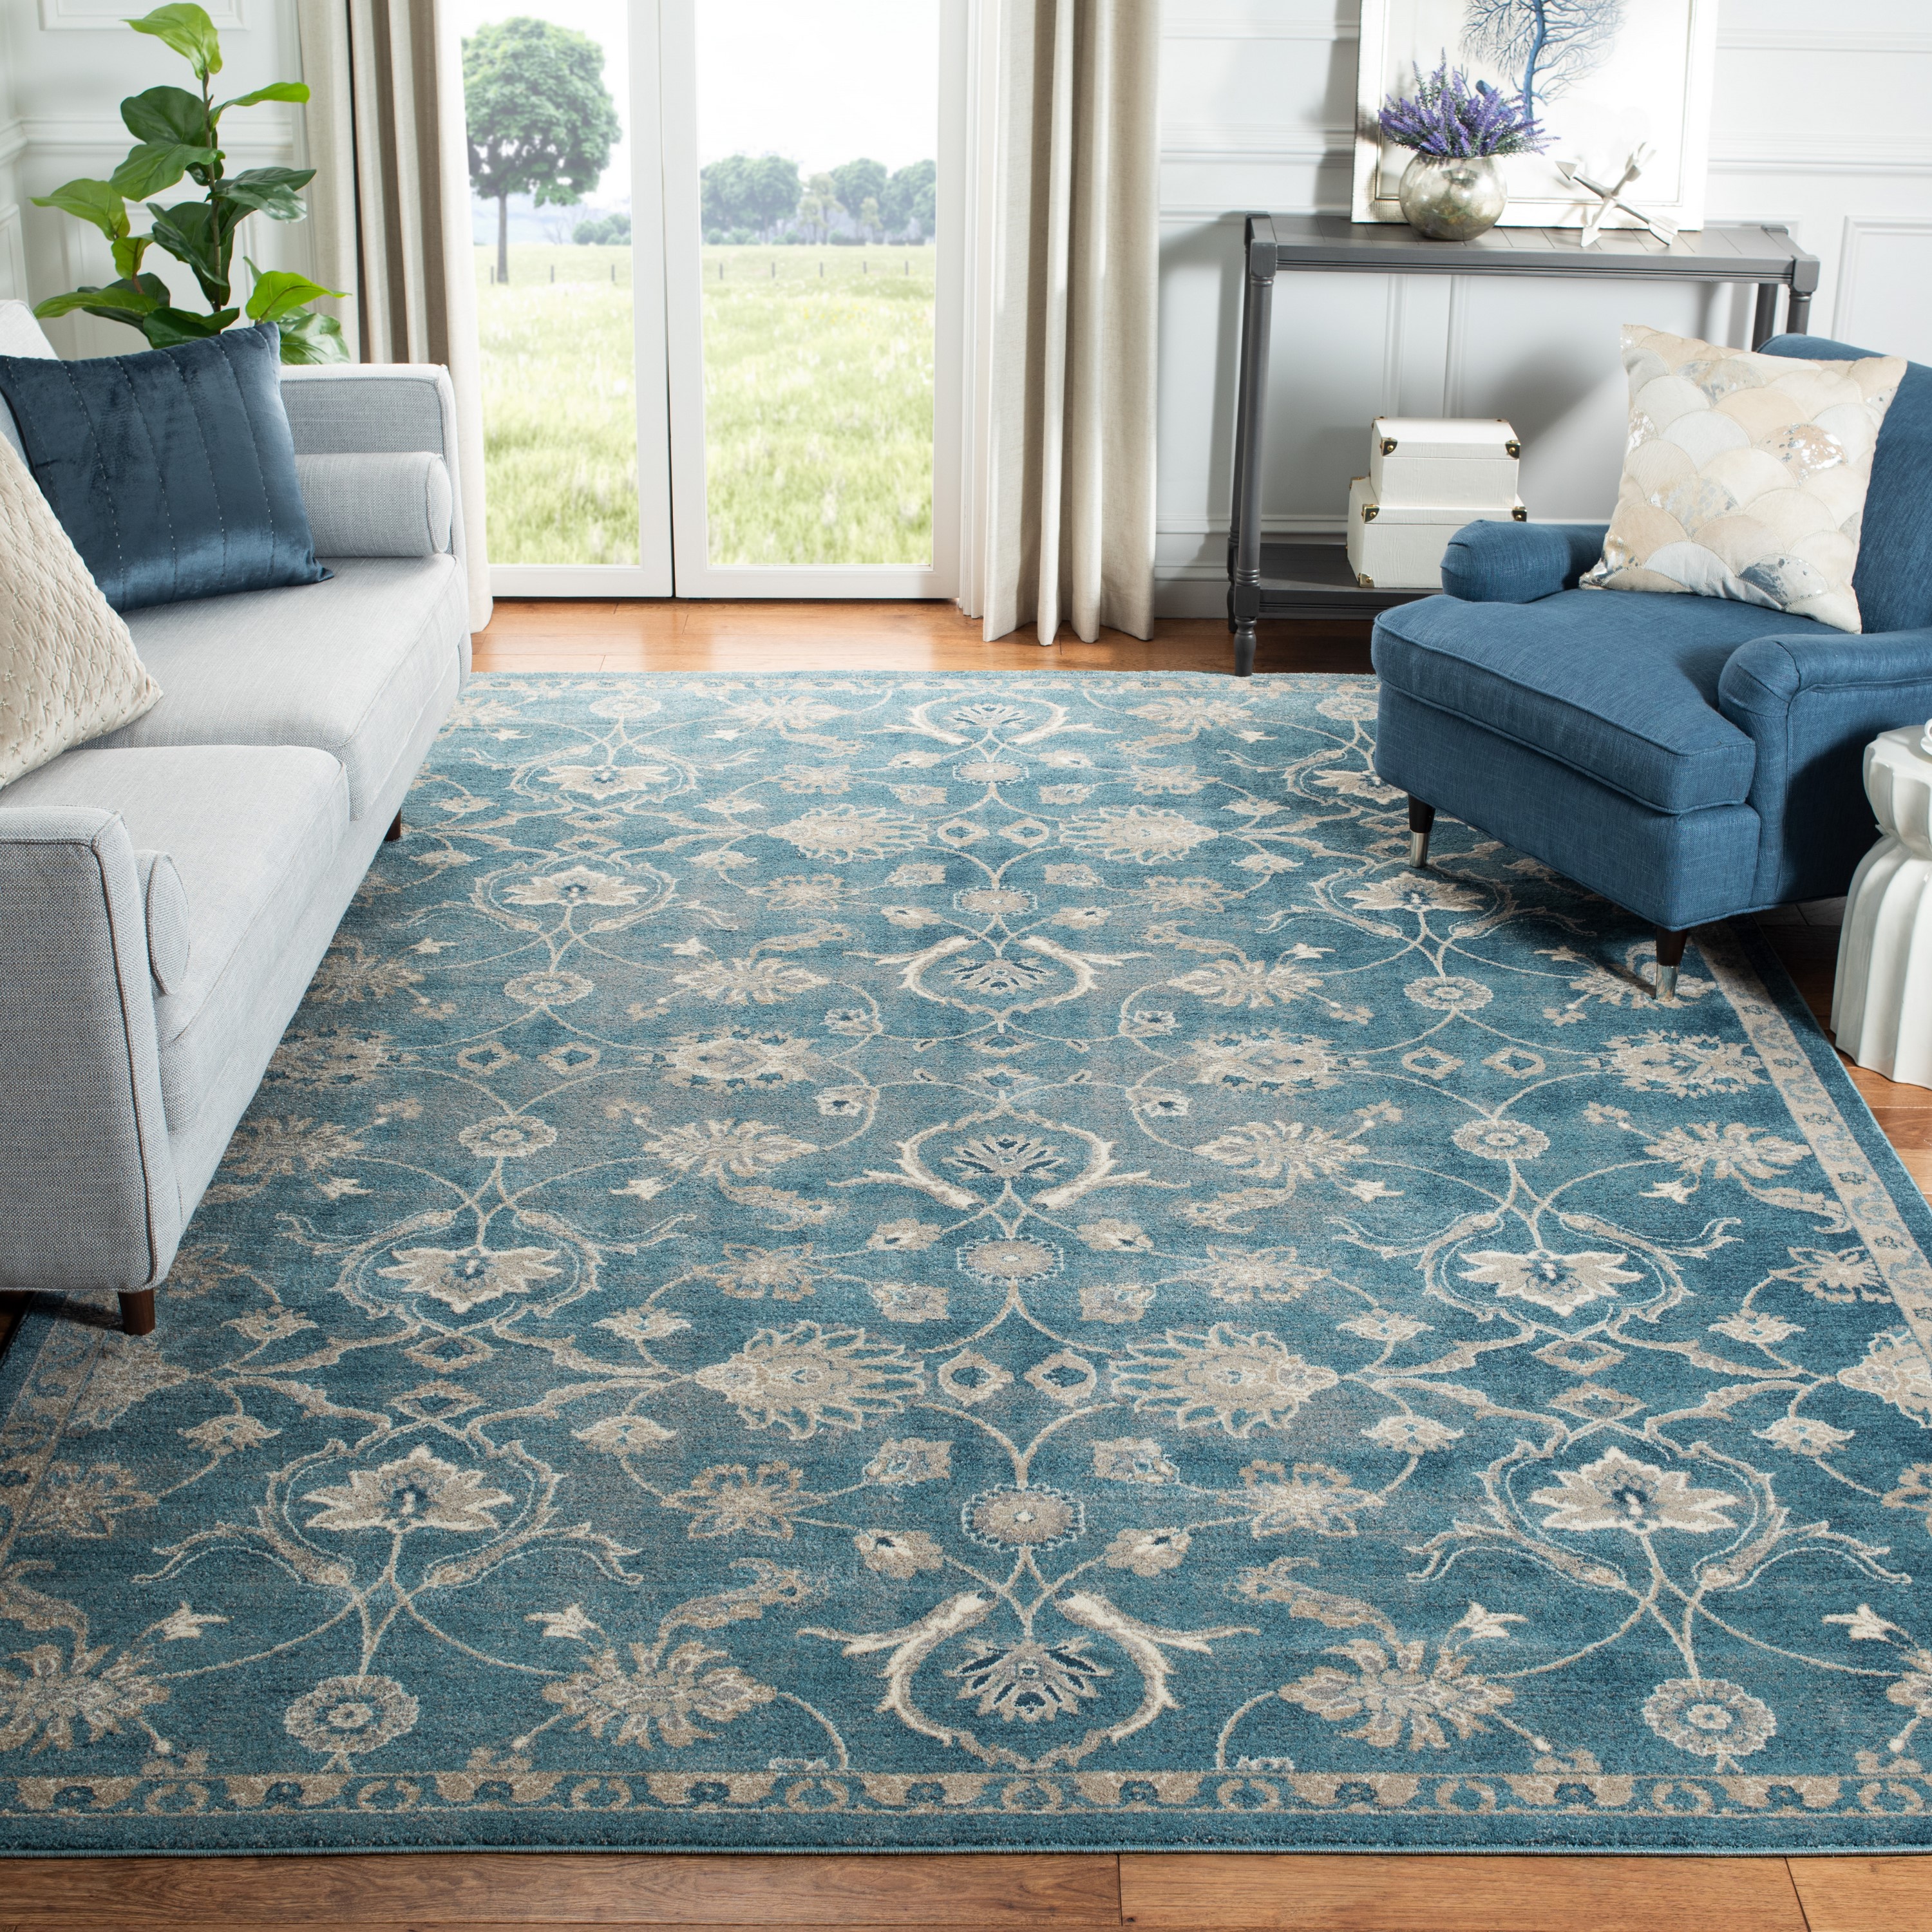 Vinyl Area Rug With Moroccan Tiles Design in Blue and Beige. 